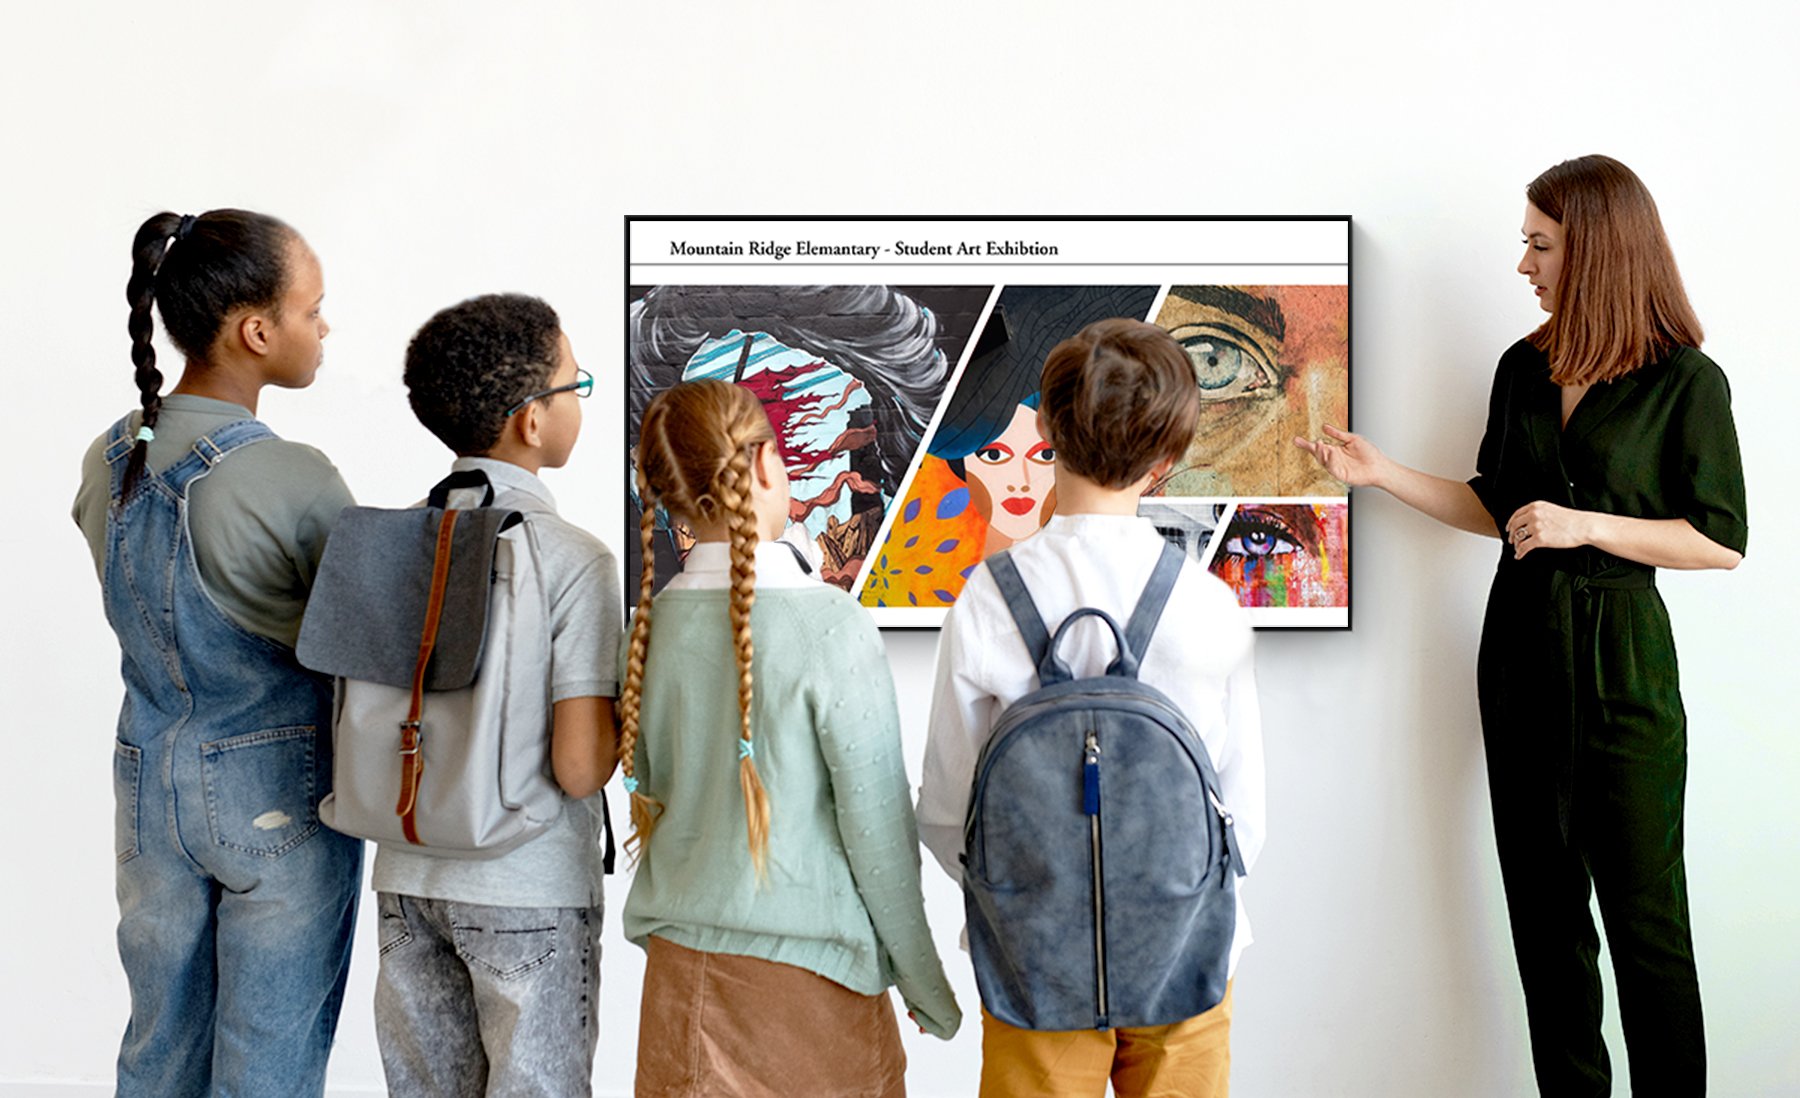 Teacher showing students an art exhibition on a BenQ display using digital signage software